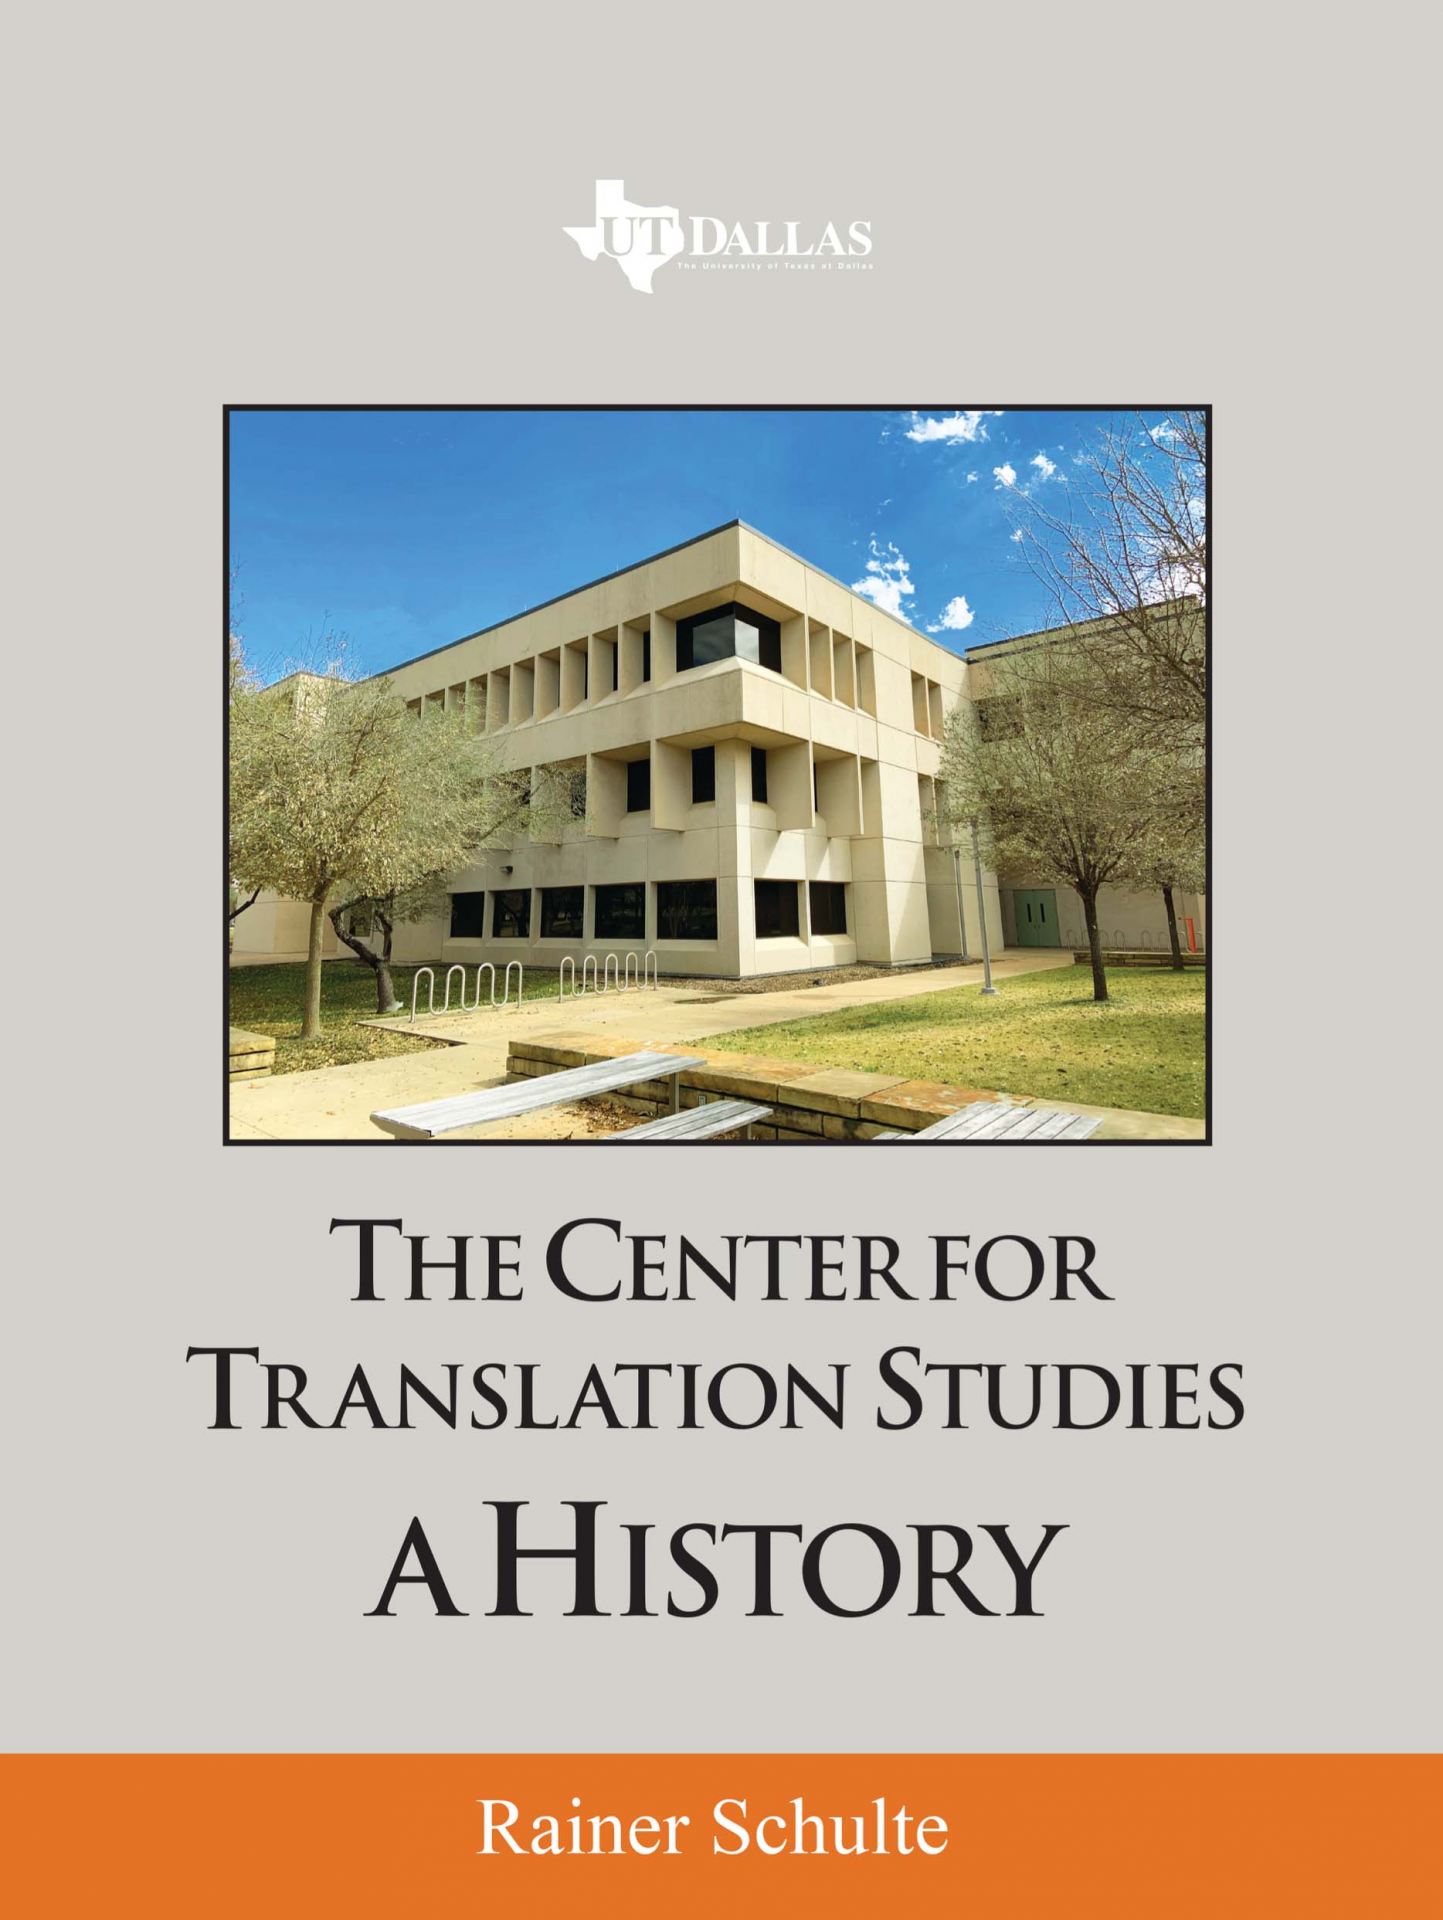 Cover of the book, "The Center for Translation Studies: A History" by Rainer Schulte.